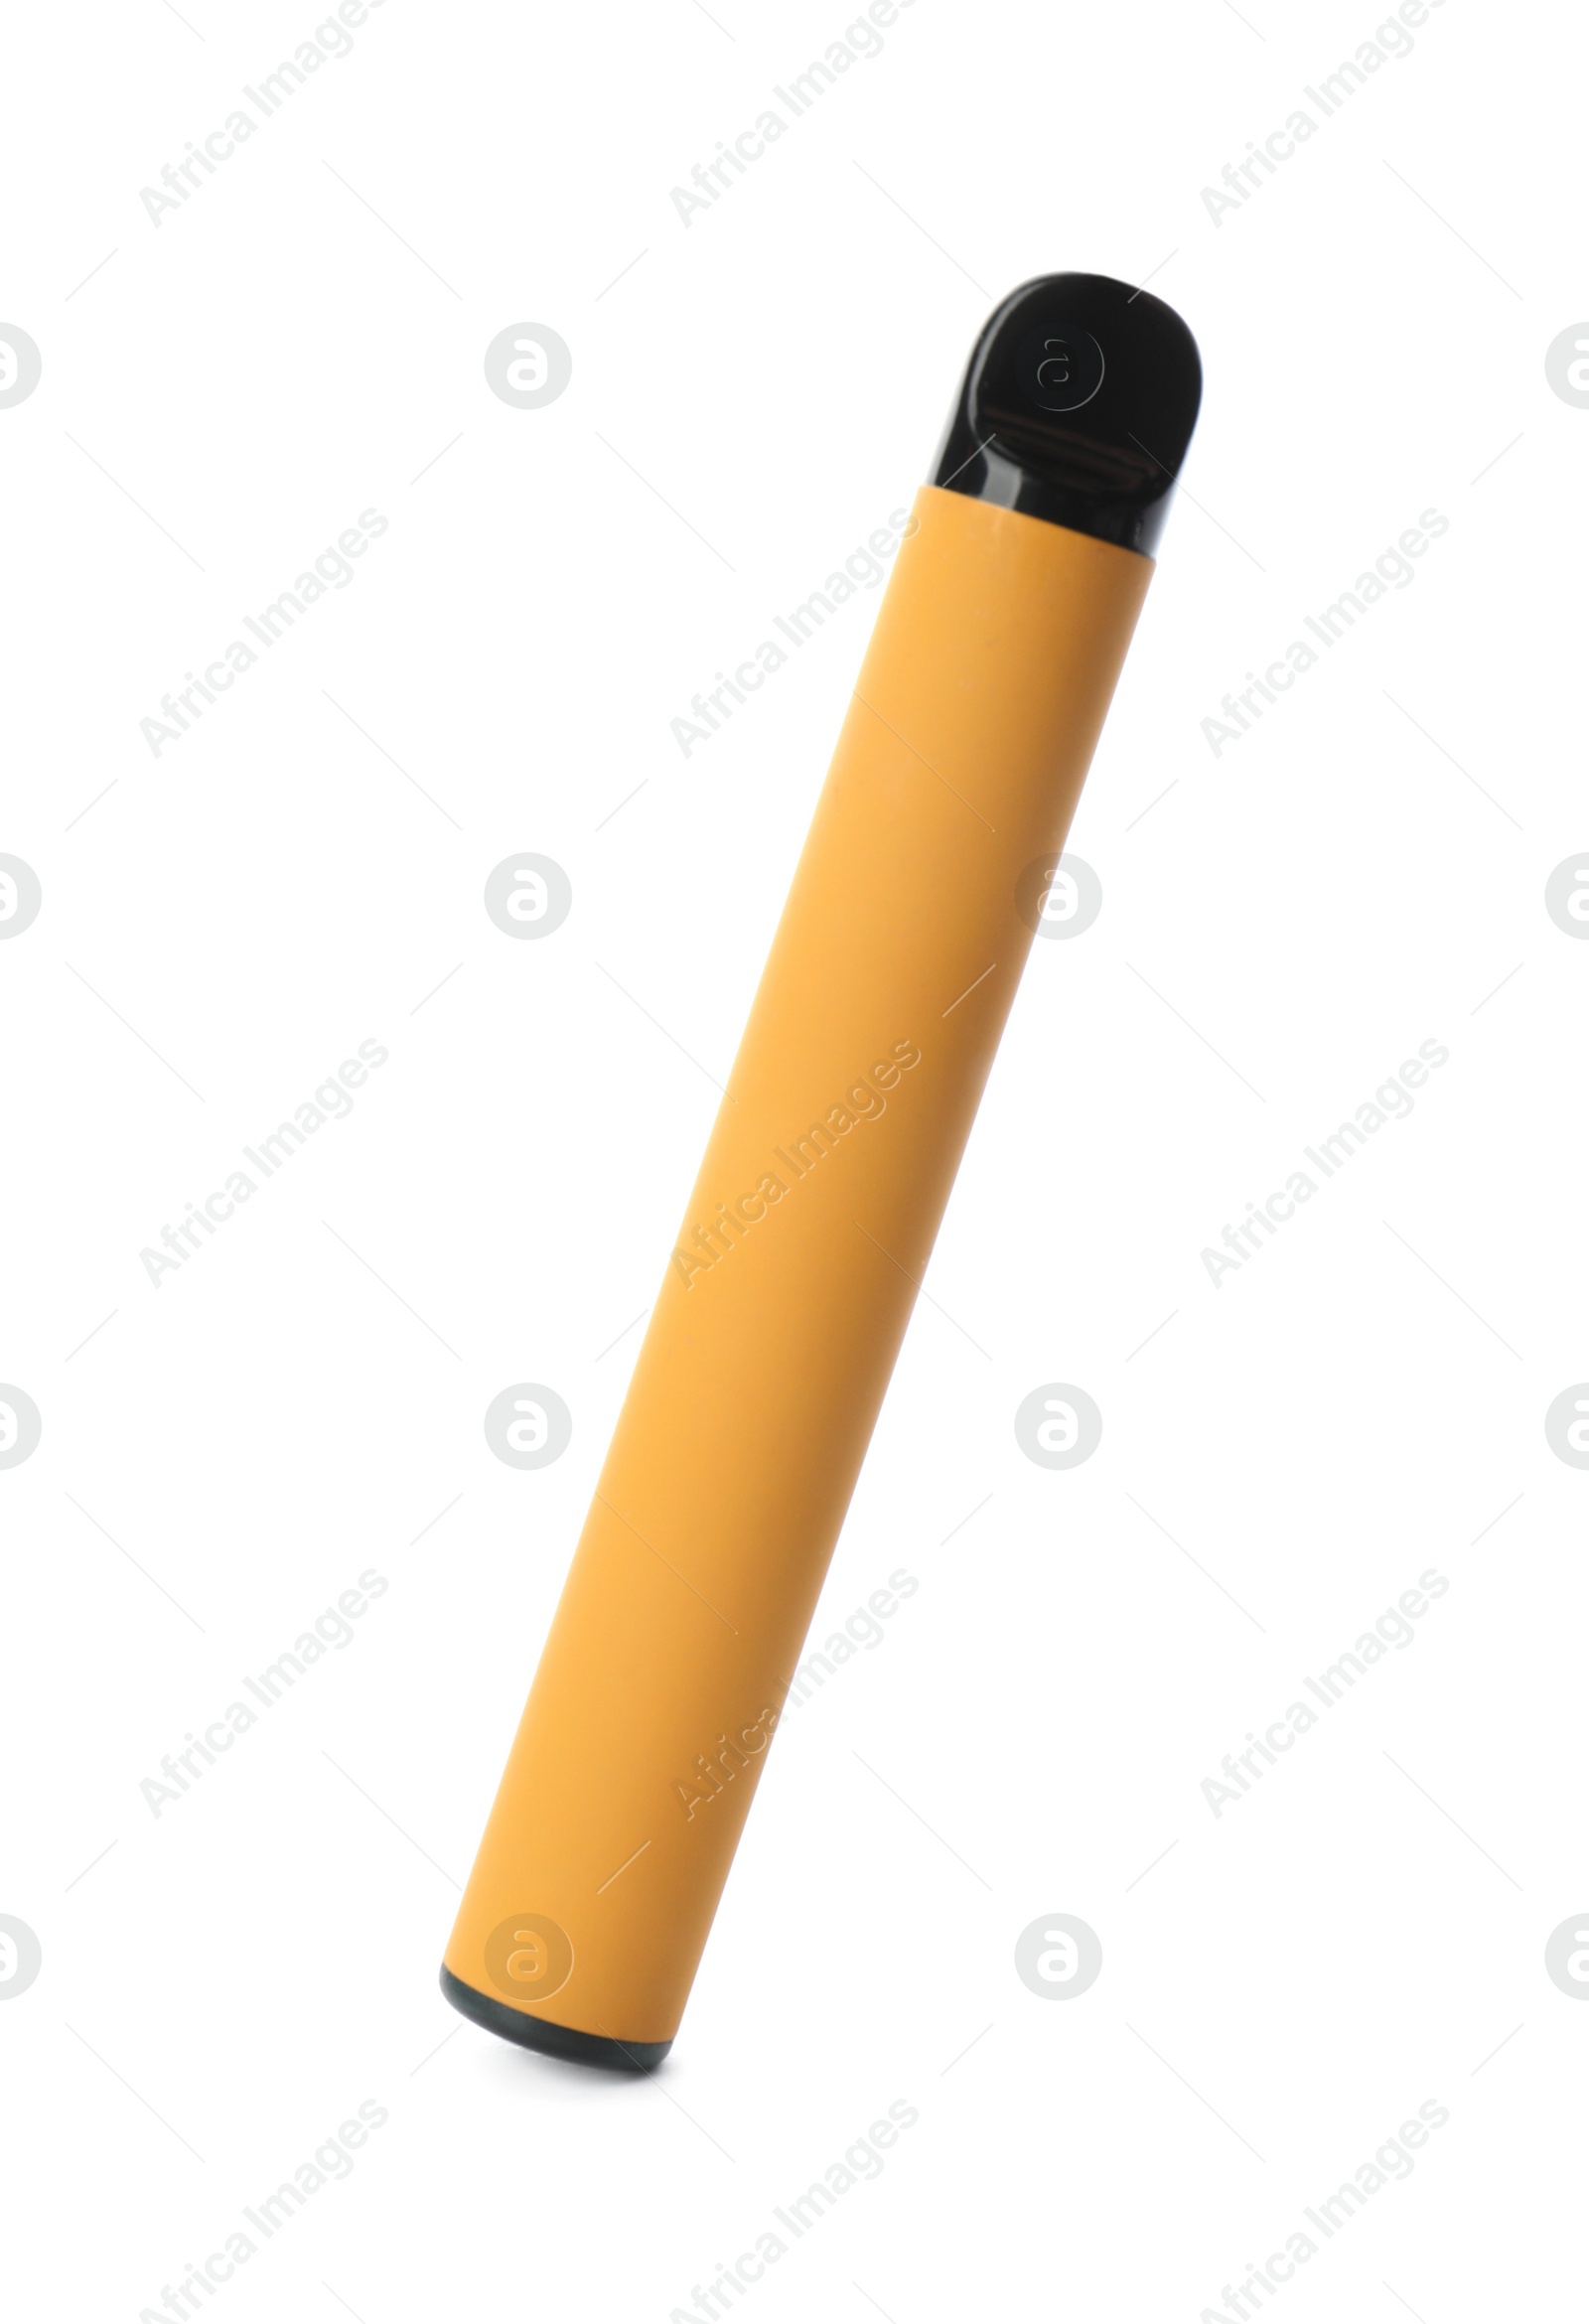 Photo of Disposable electronic smoking device isolated on white